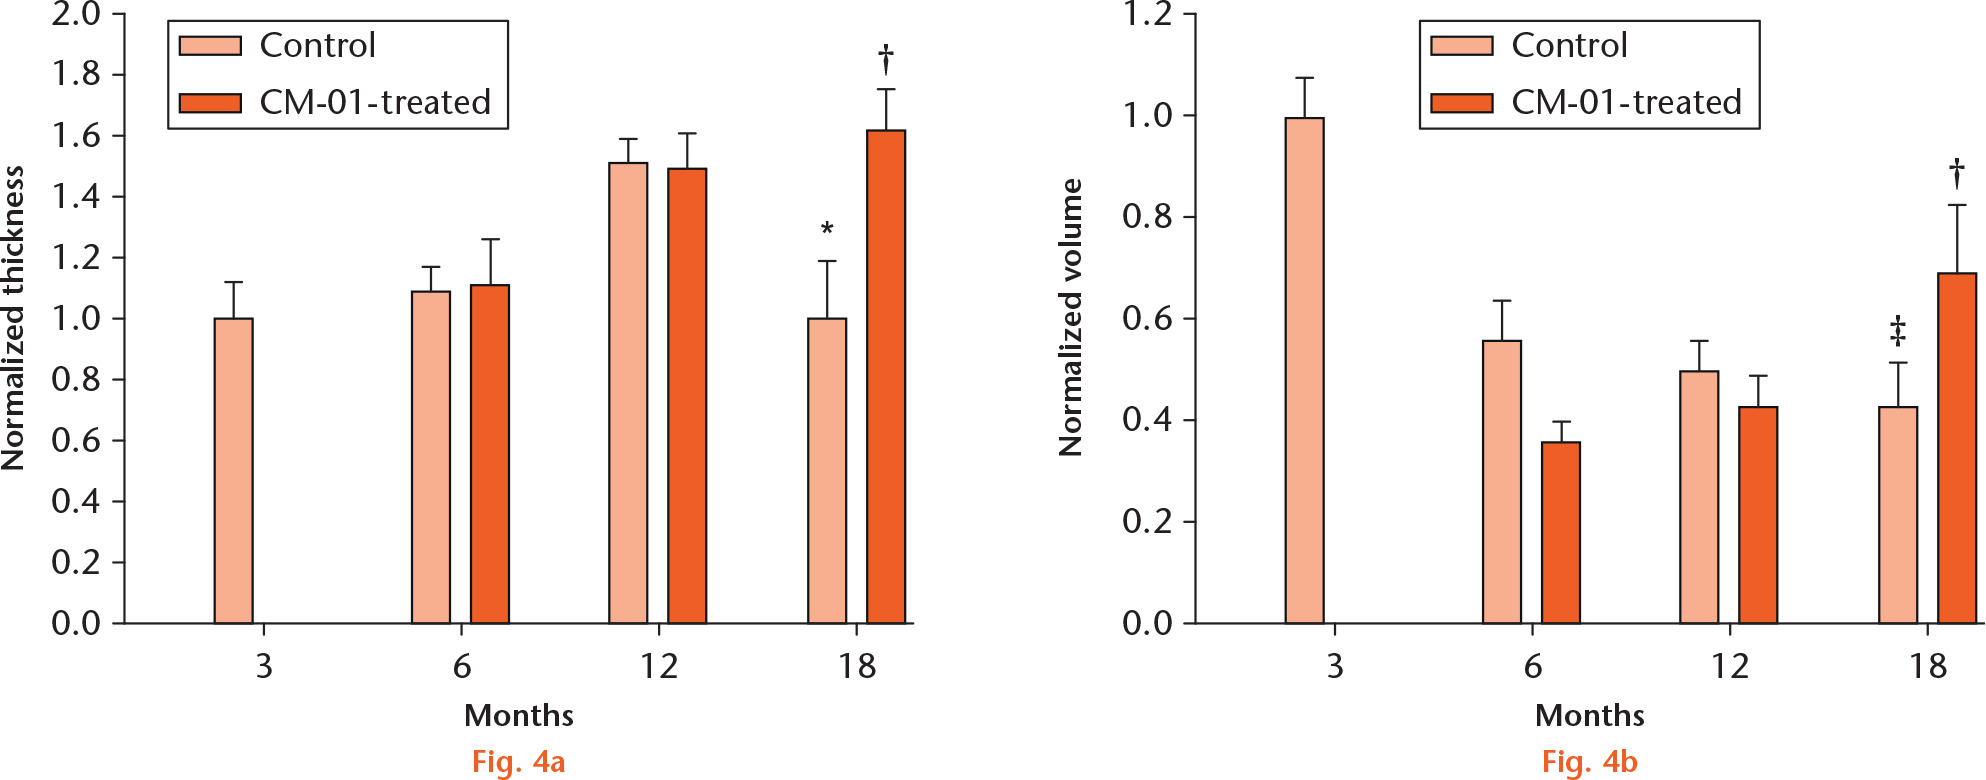  
            Graphs showing a) articular cartilage thickness and b) cartilage island volume in the central area of the medial tibial plateau. Light orange bars, normalized cartilage thickness and island volume in the untreated guinea pigs; dark orange bars, normalized cartilage thickness and island volume in the Carolinas Molecule-01 (CM-01)-treated guinea pigs. *p < 0.05, at 18 months versus 12 months (Student’s t-test); †p < 0.05, at 18 months CM-01-treated versus 18 months untreated control (Student’s t-test). ‡p < 0.05, at 18 months versus three months (Student’s t-test).
          